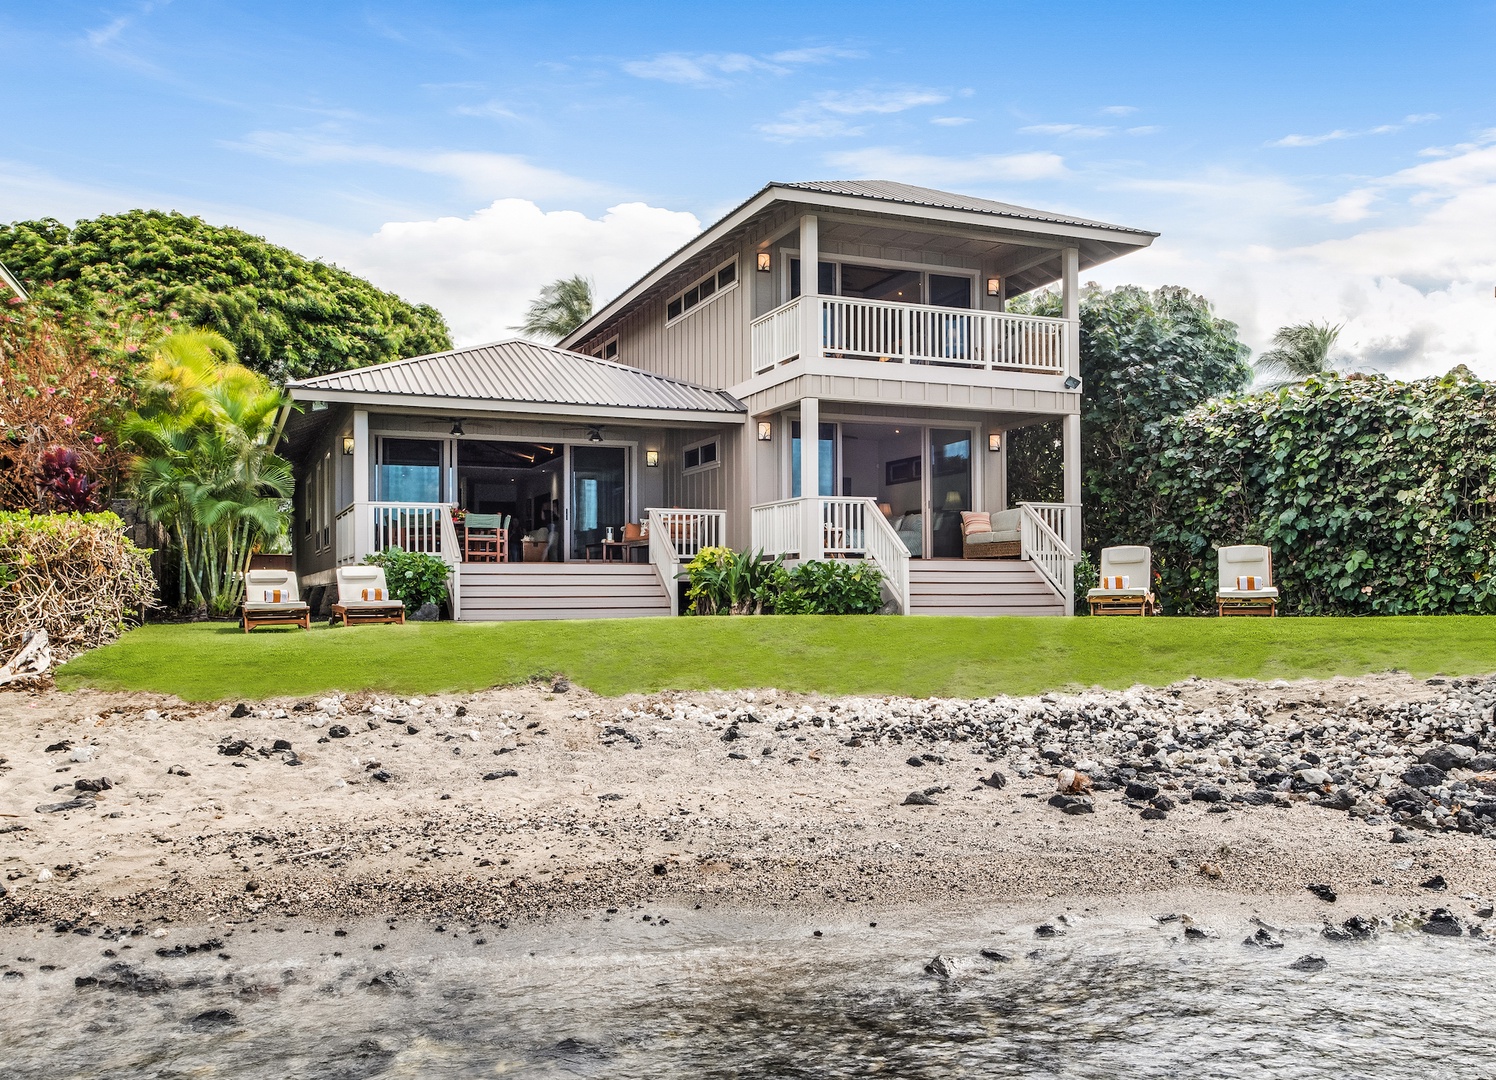 Kamuela Vacation Rentals, 3BD Estate Home at Puako Bay (10D) - Beachside Bungalow w/ an Easy Flow to the Beautiful Outdoors. Primary Bedroom Commands Entire Top Floor